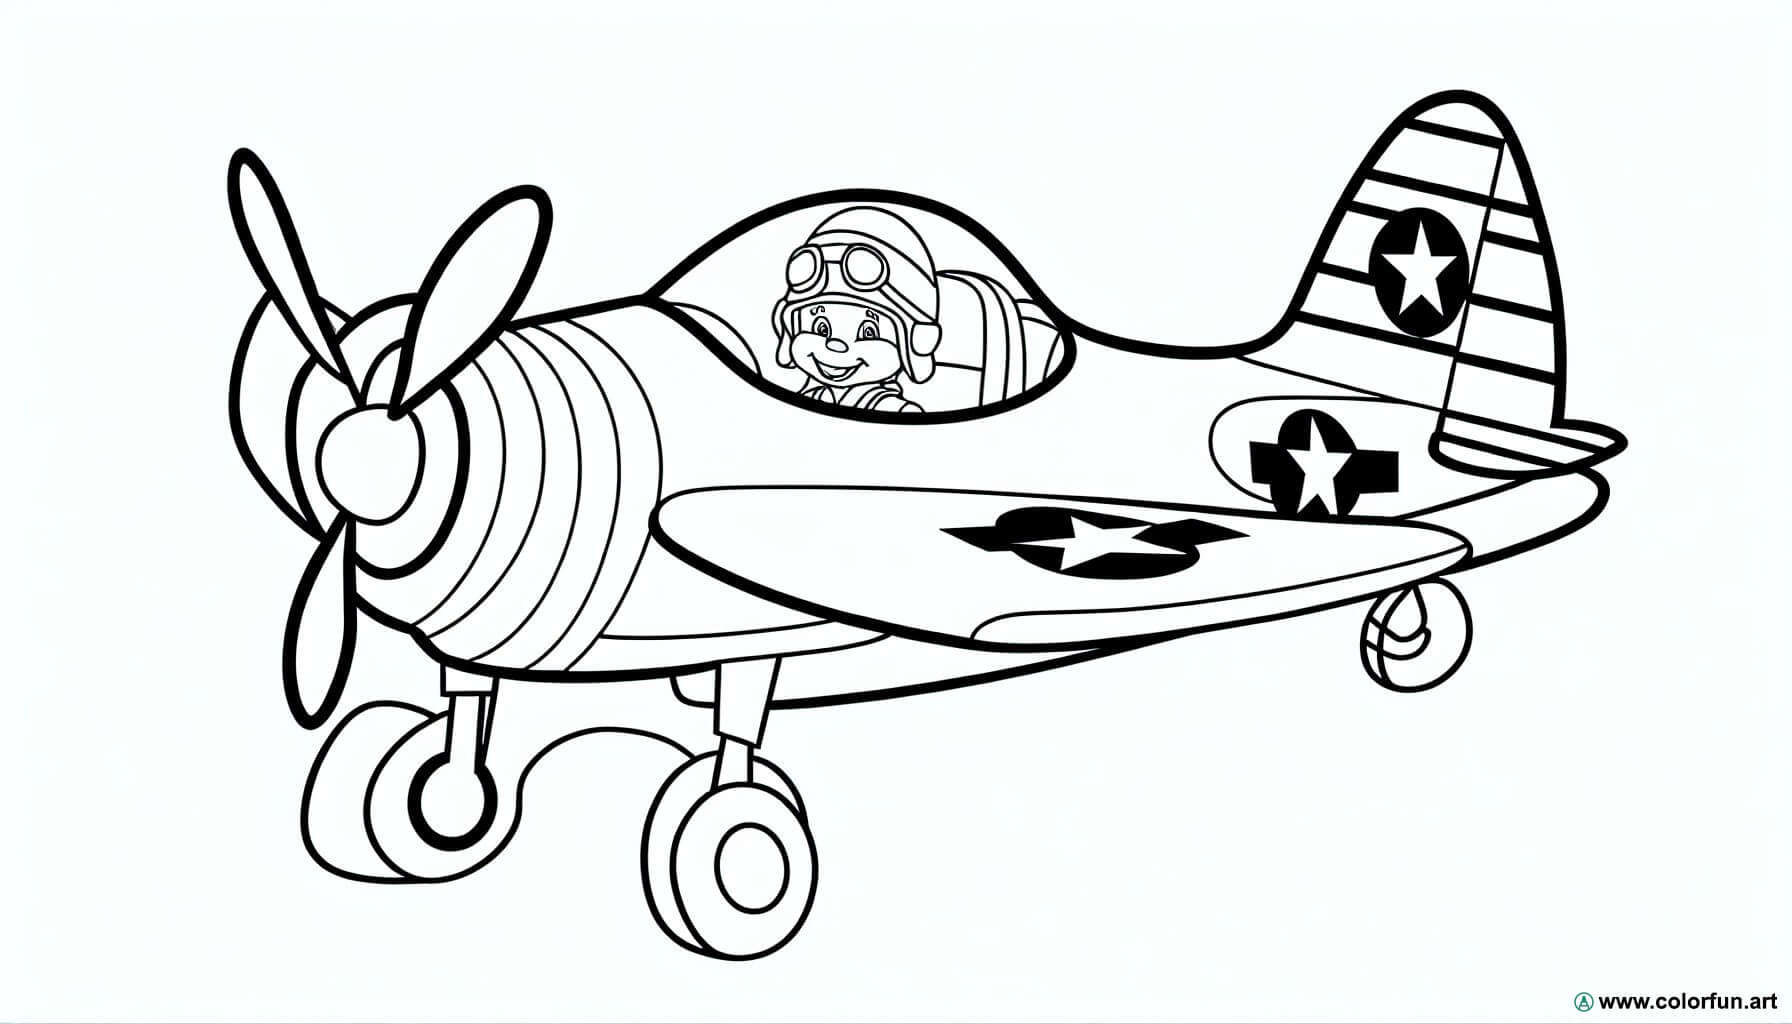 coloring page military airplane